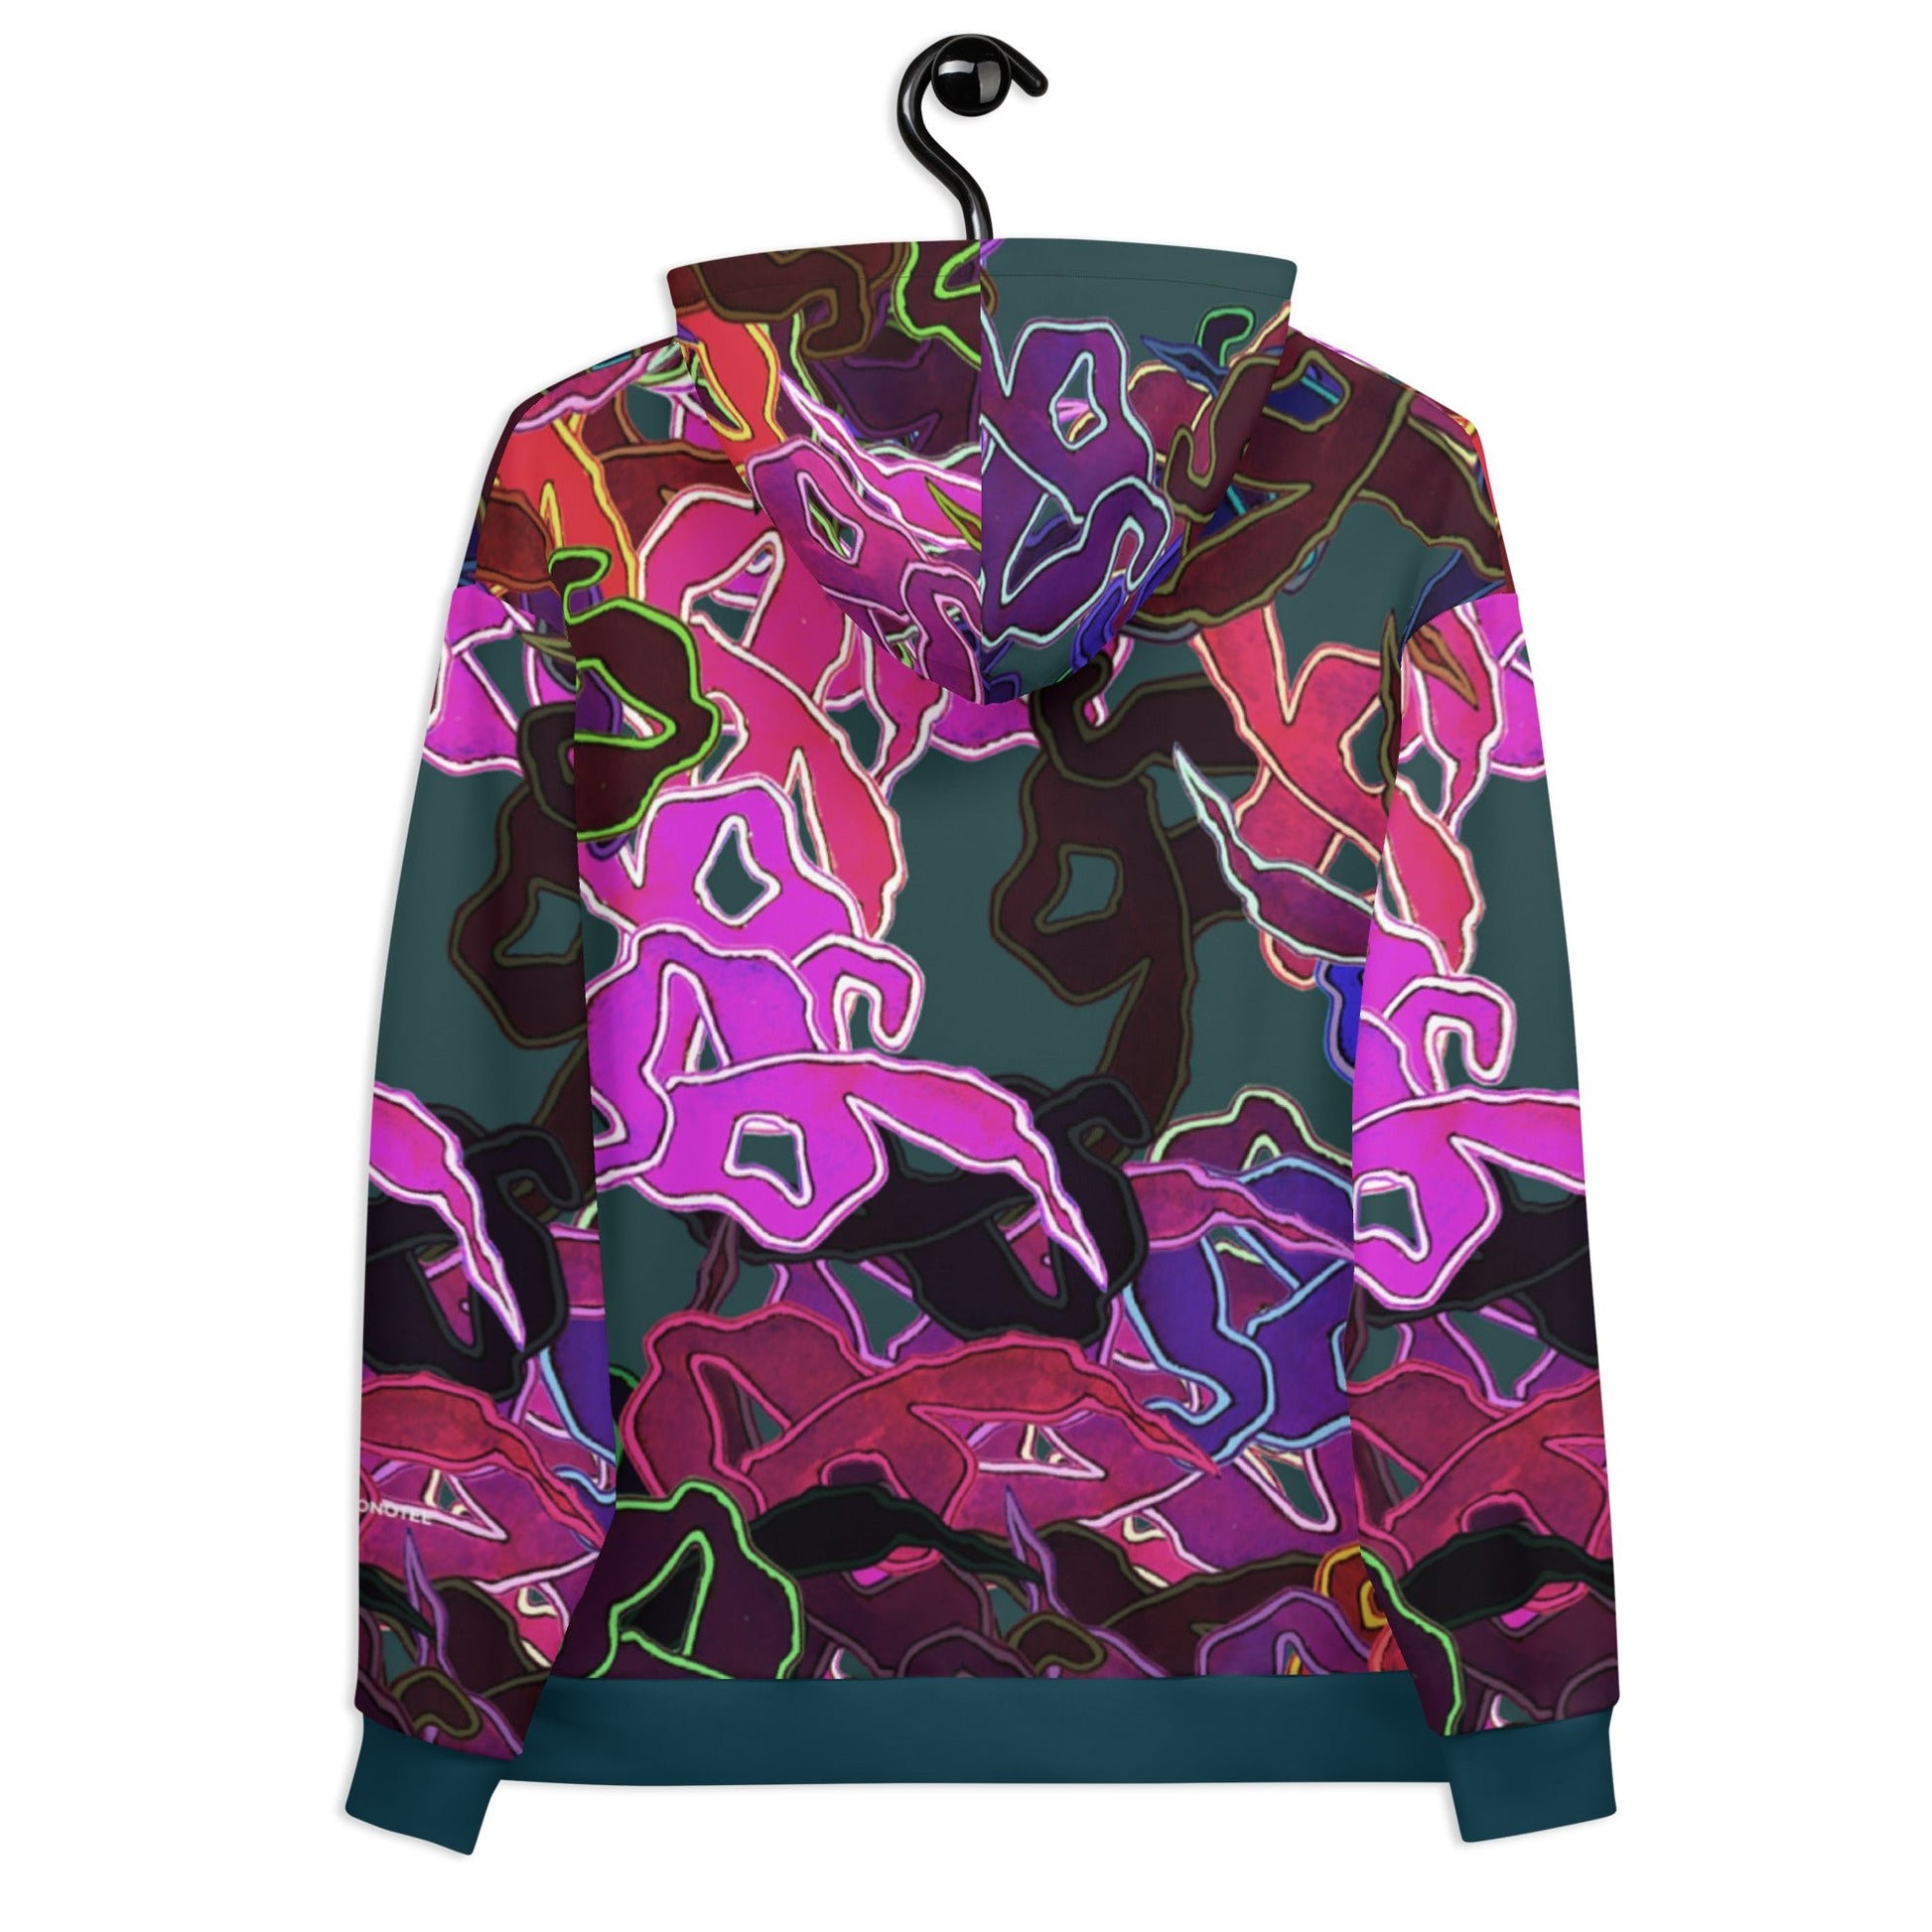 HHH | All-Over Print Unisex Hoodie - Bonotee